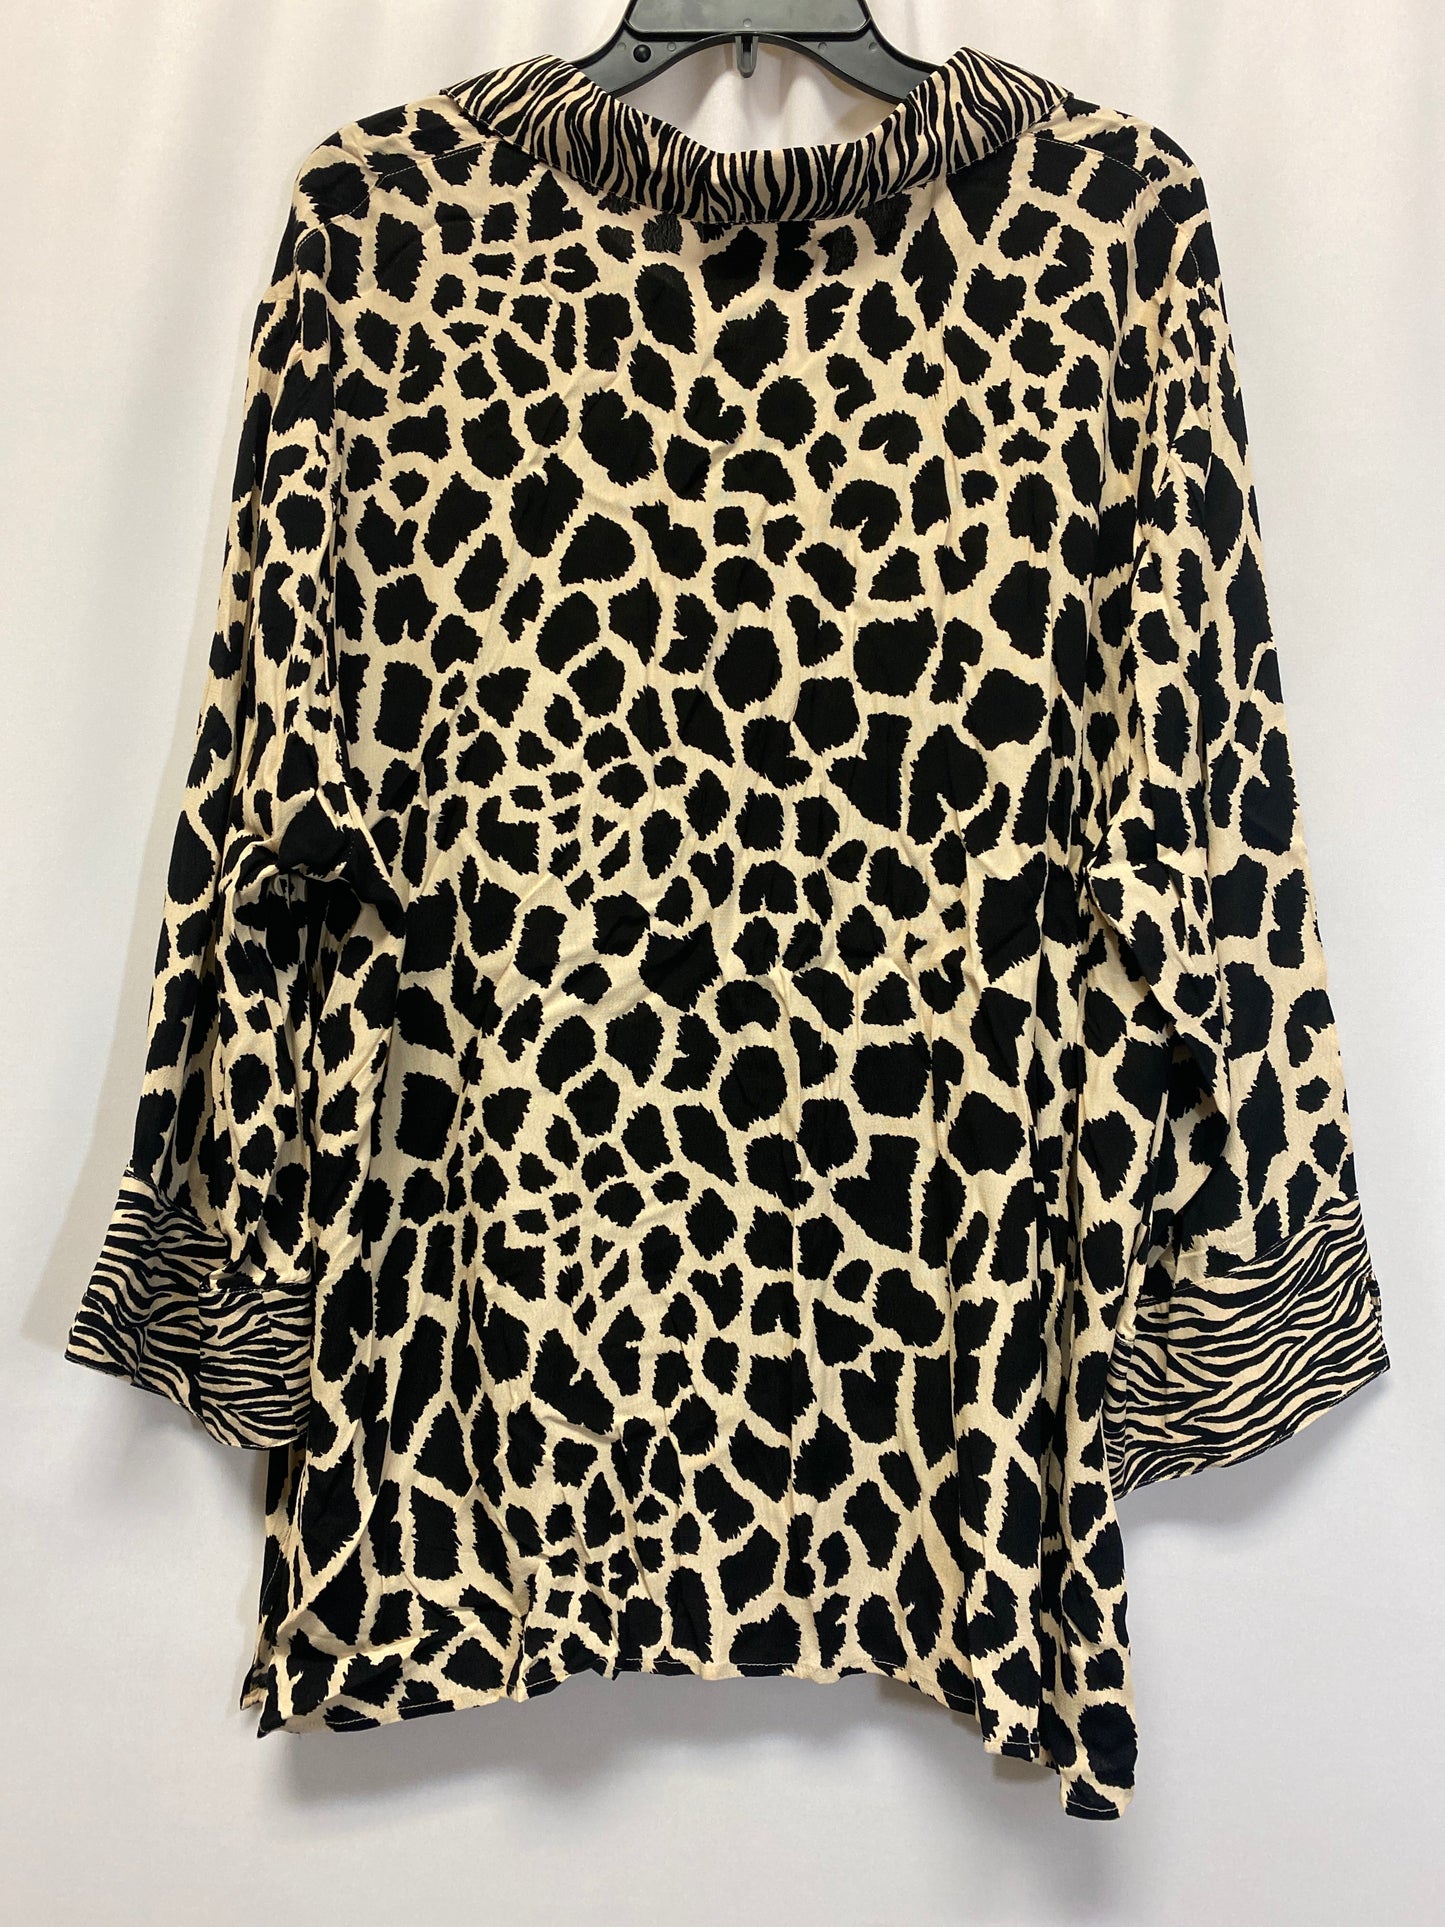 Animal Print Top Long Sleeve Alfred Dunner, Size 2x